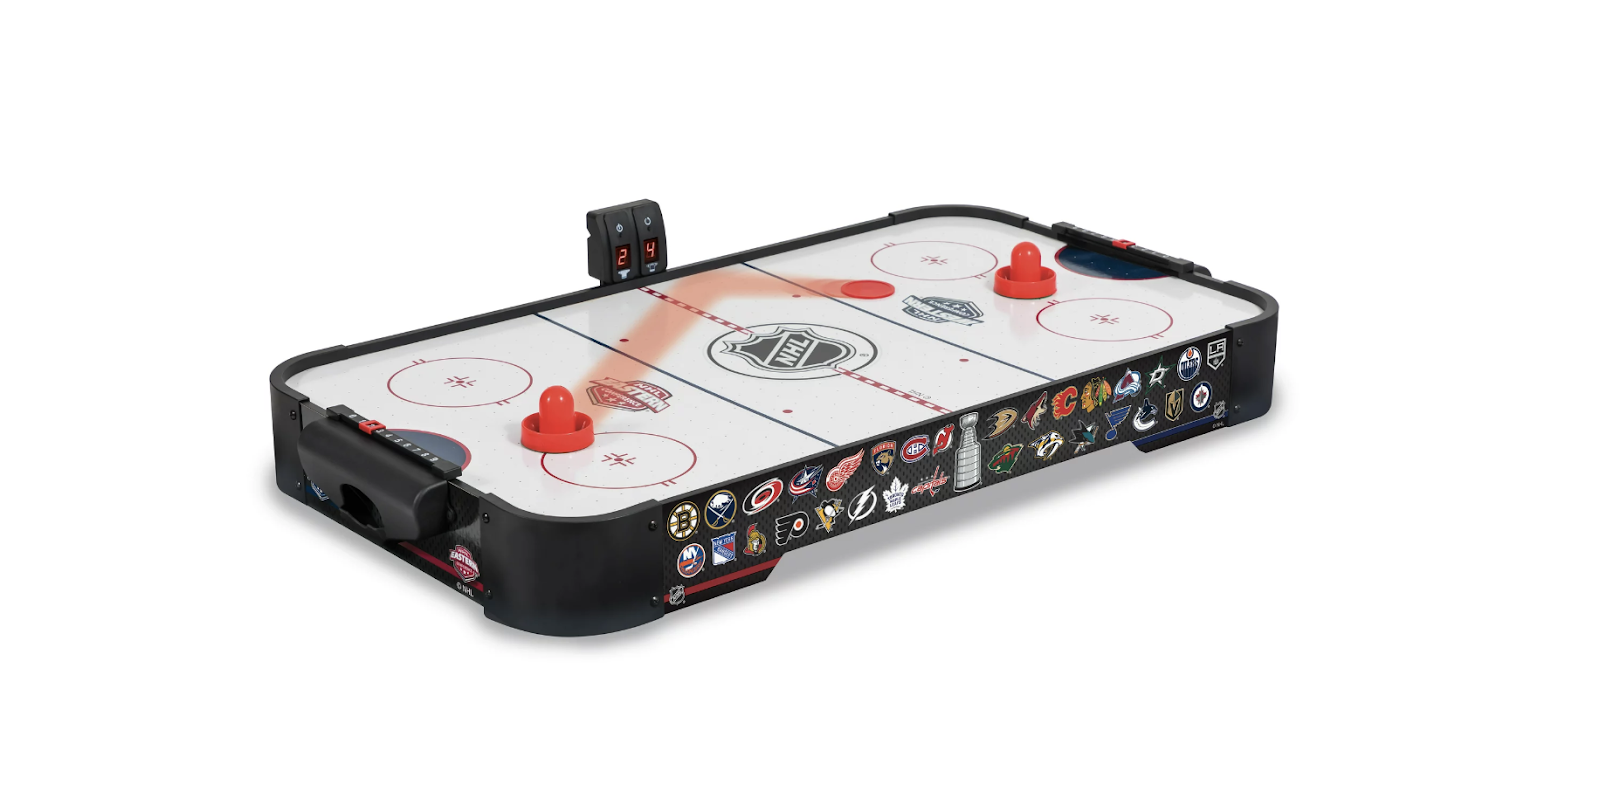 Find incredible deals on Beautiful by Drew Barrymore, an NHL air hockey table and more at Walmart